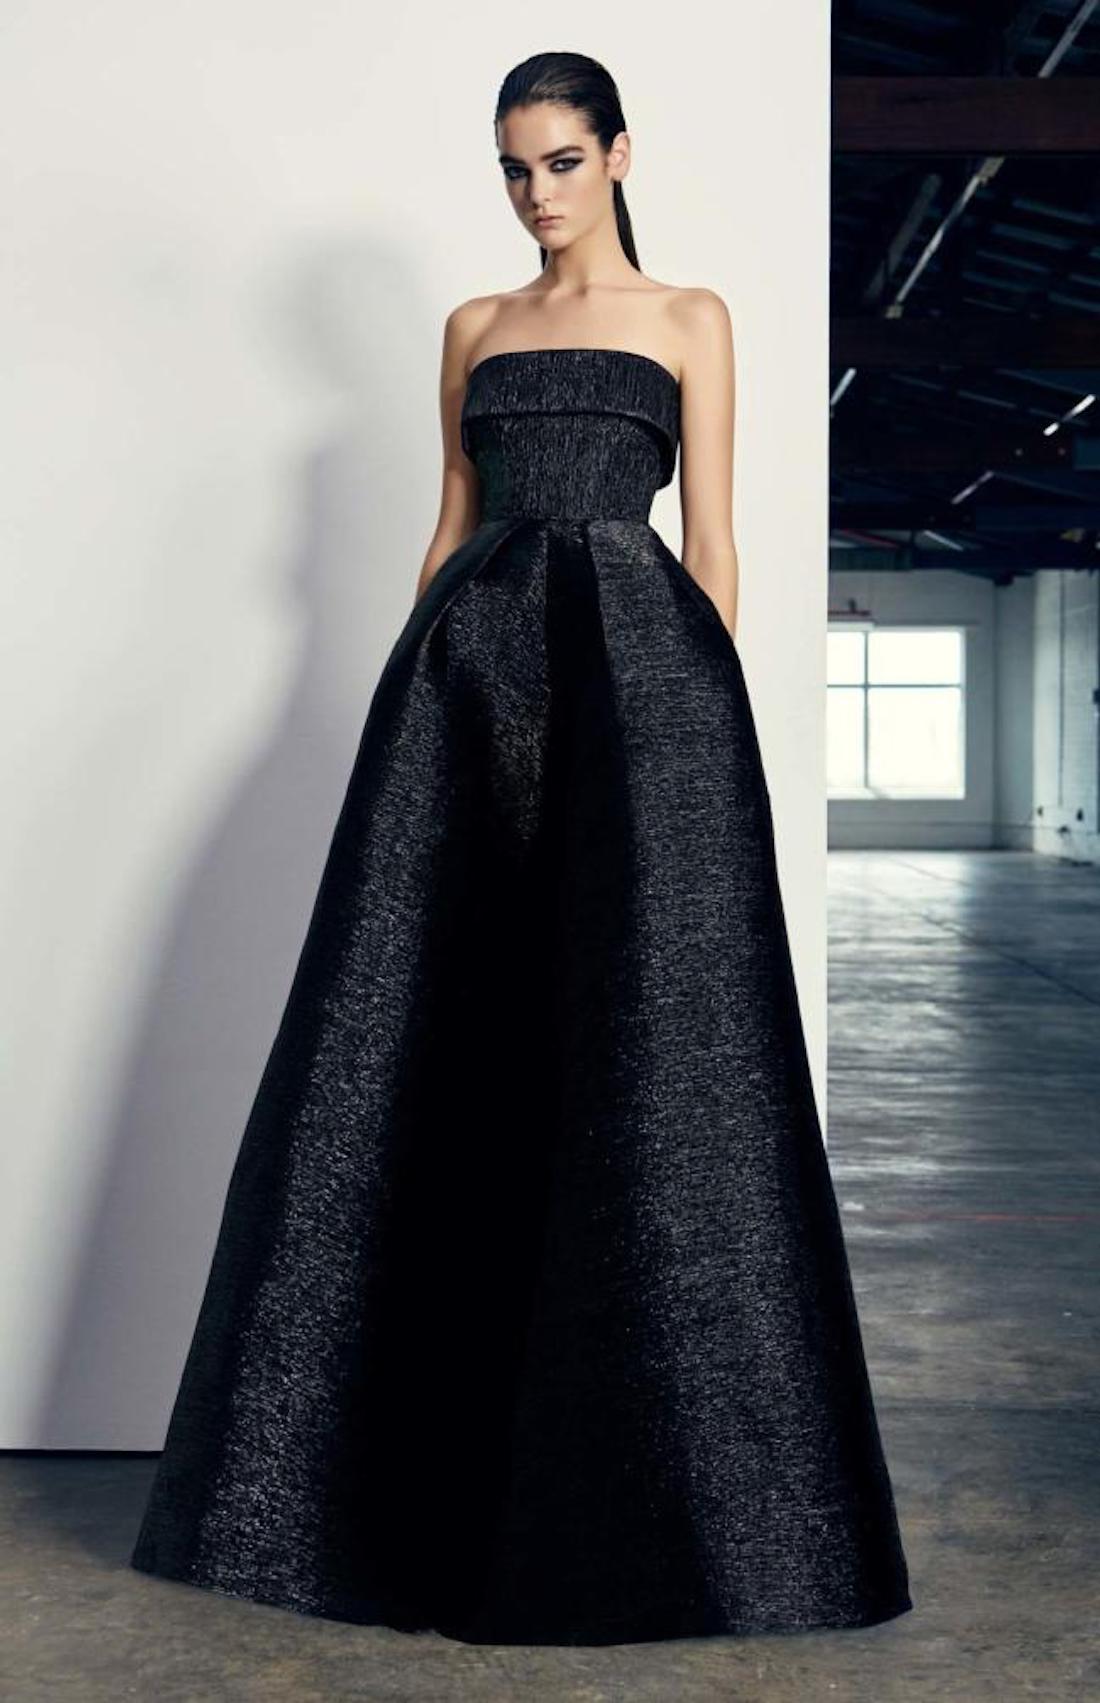 10 Perfect Little Black Dresses from Alex Perry – Project FairyTale